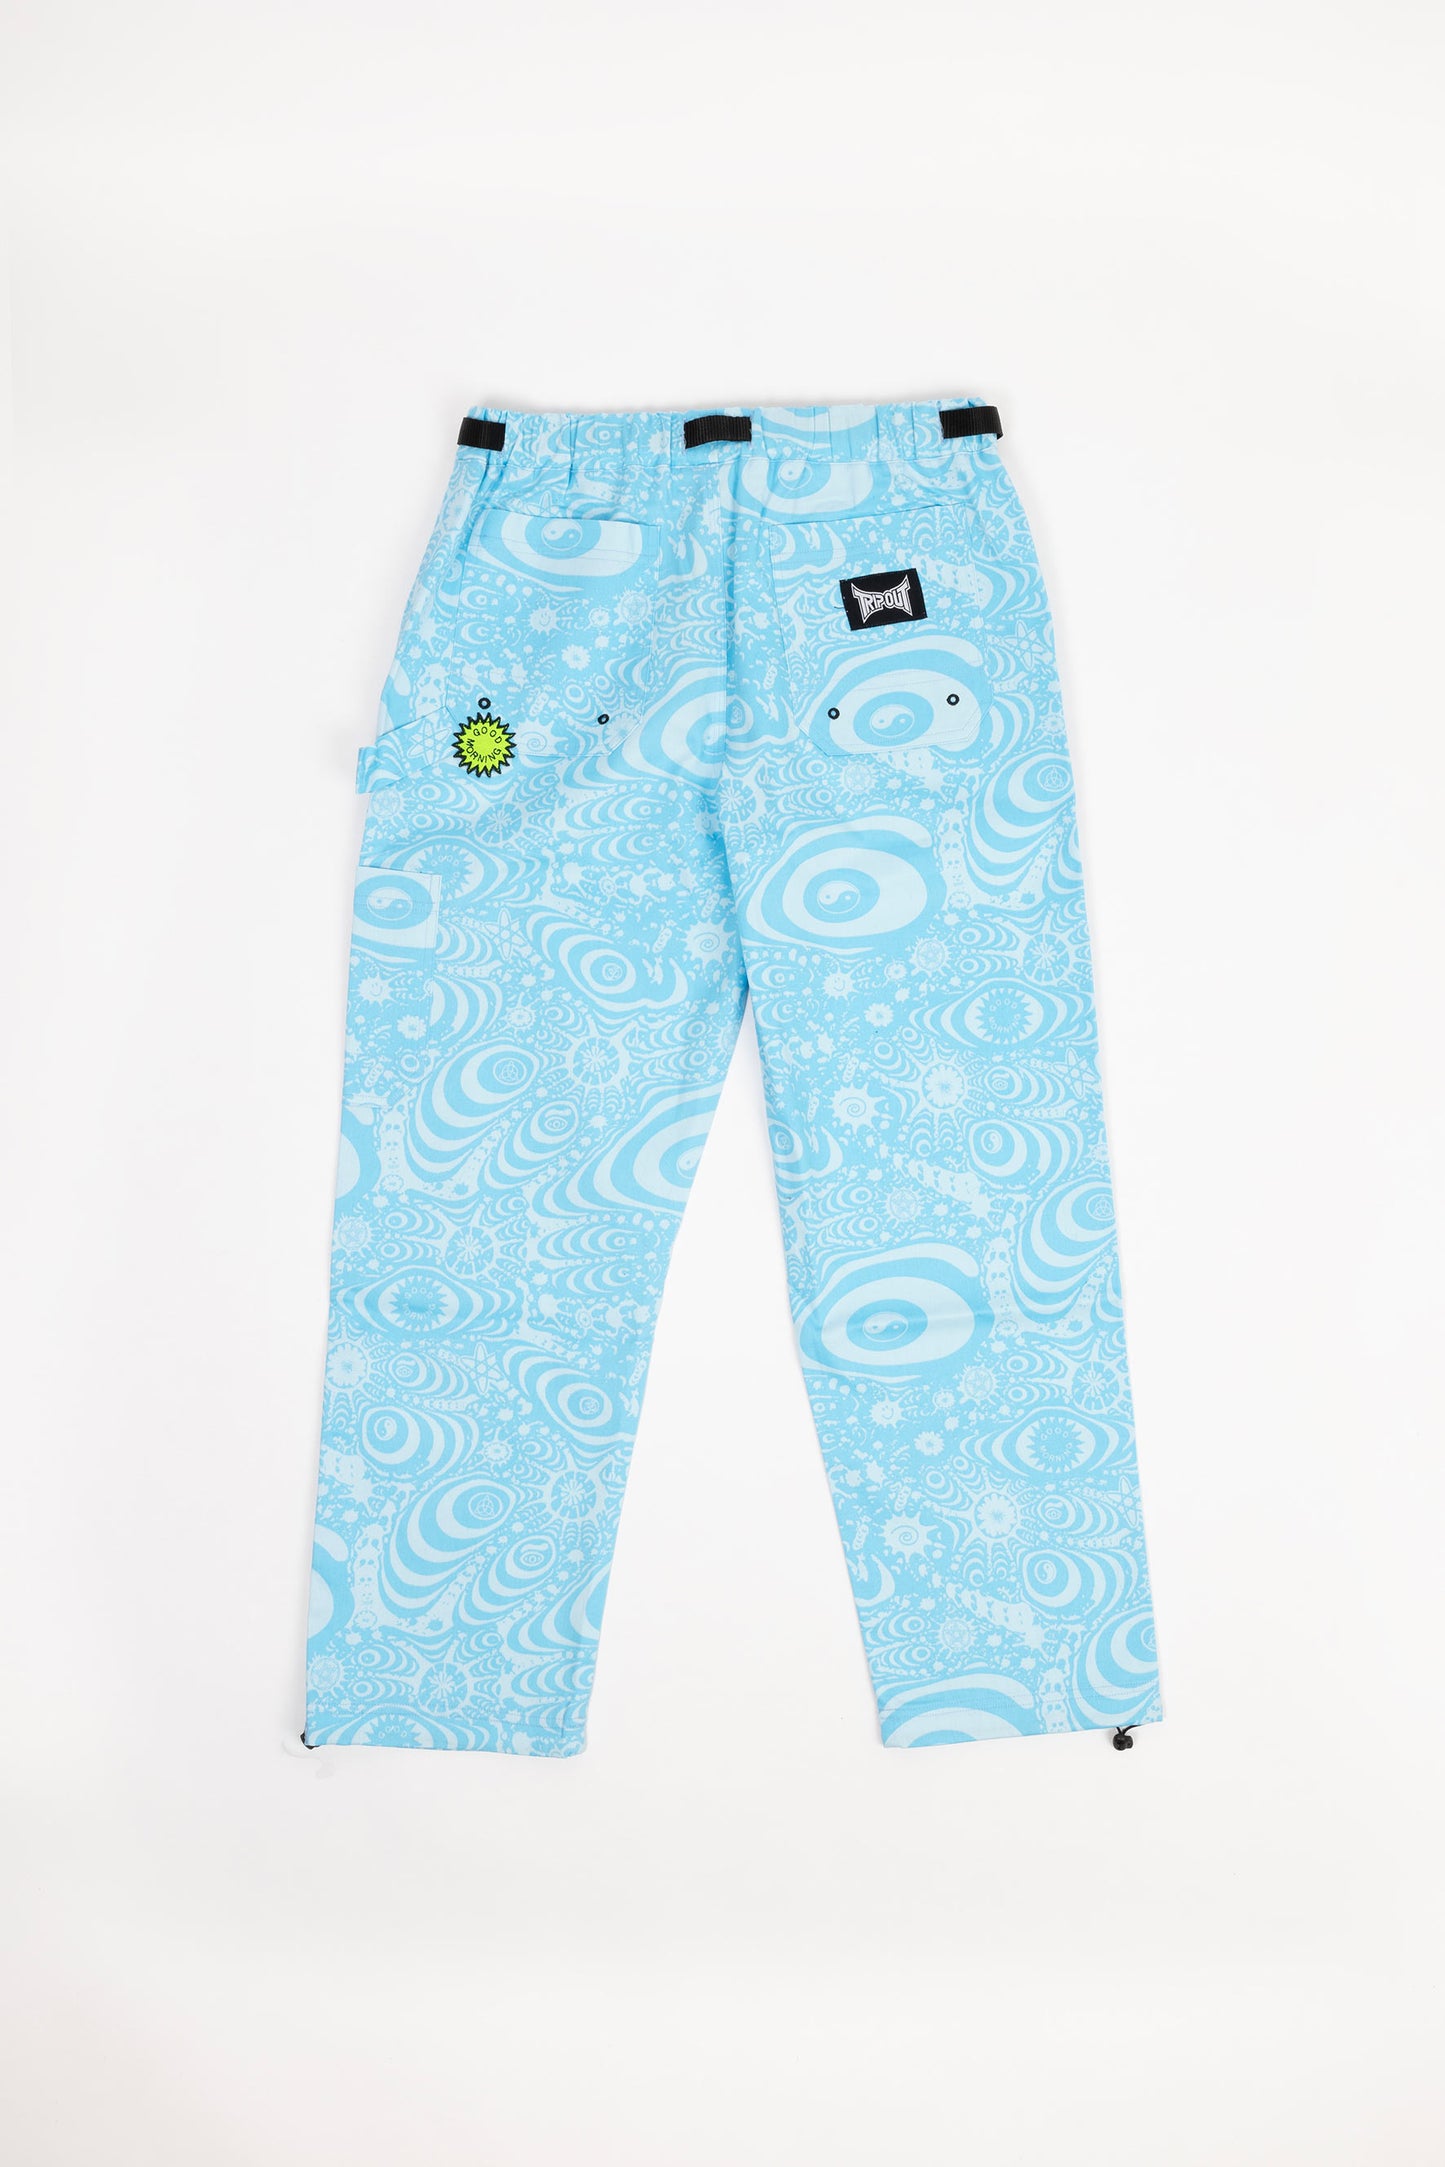 Workers Pant – Knowhere Blue